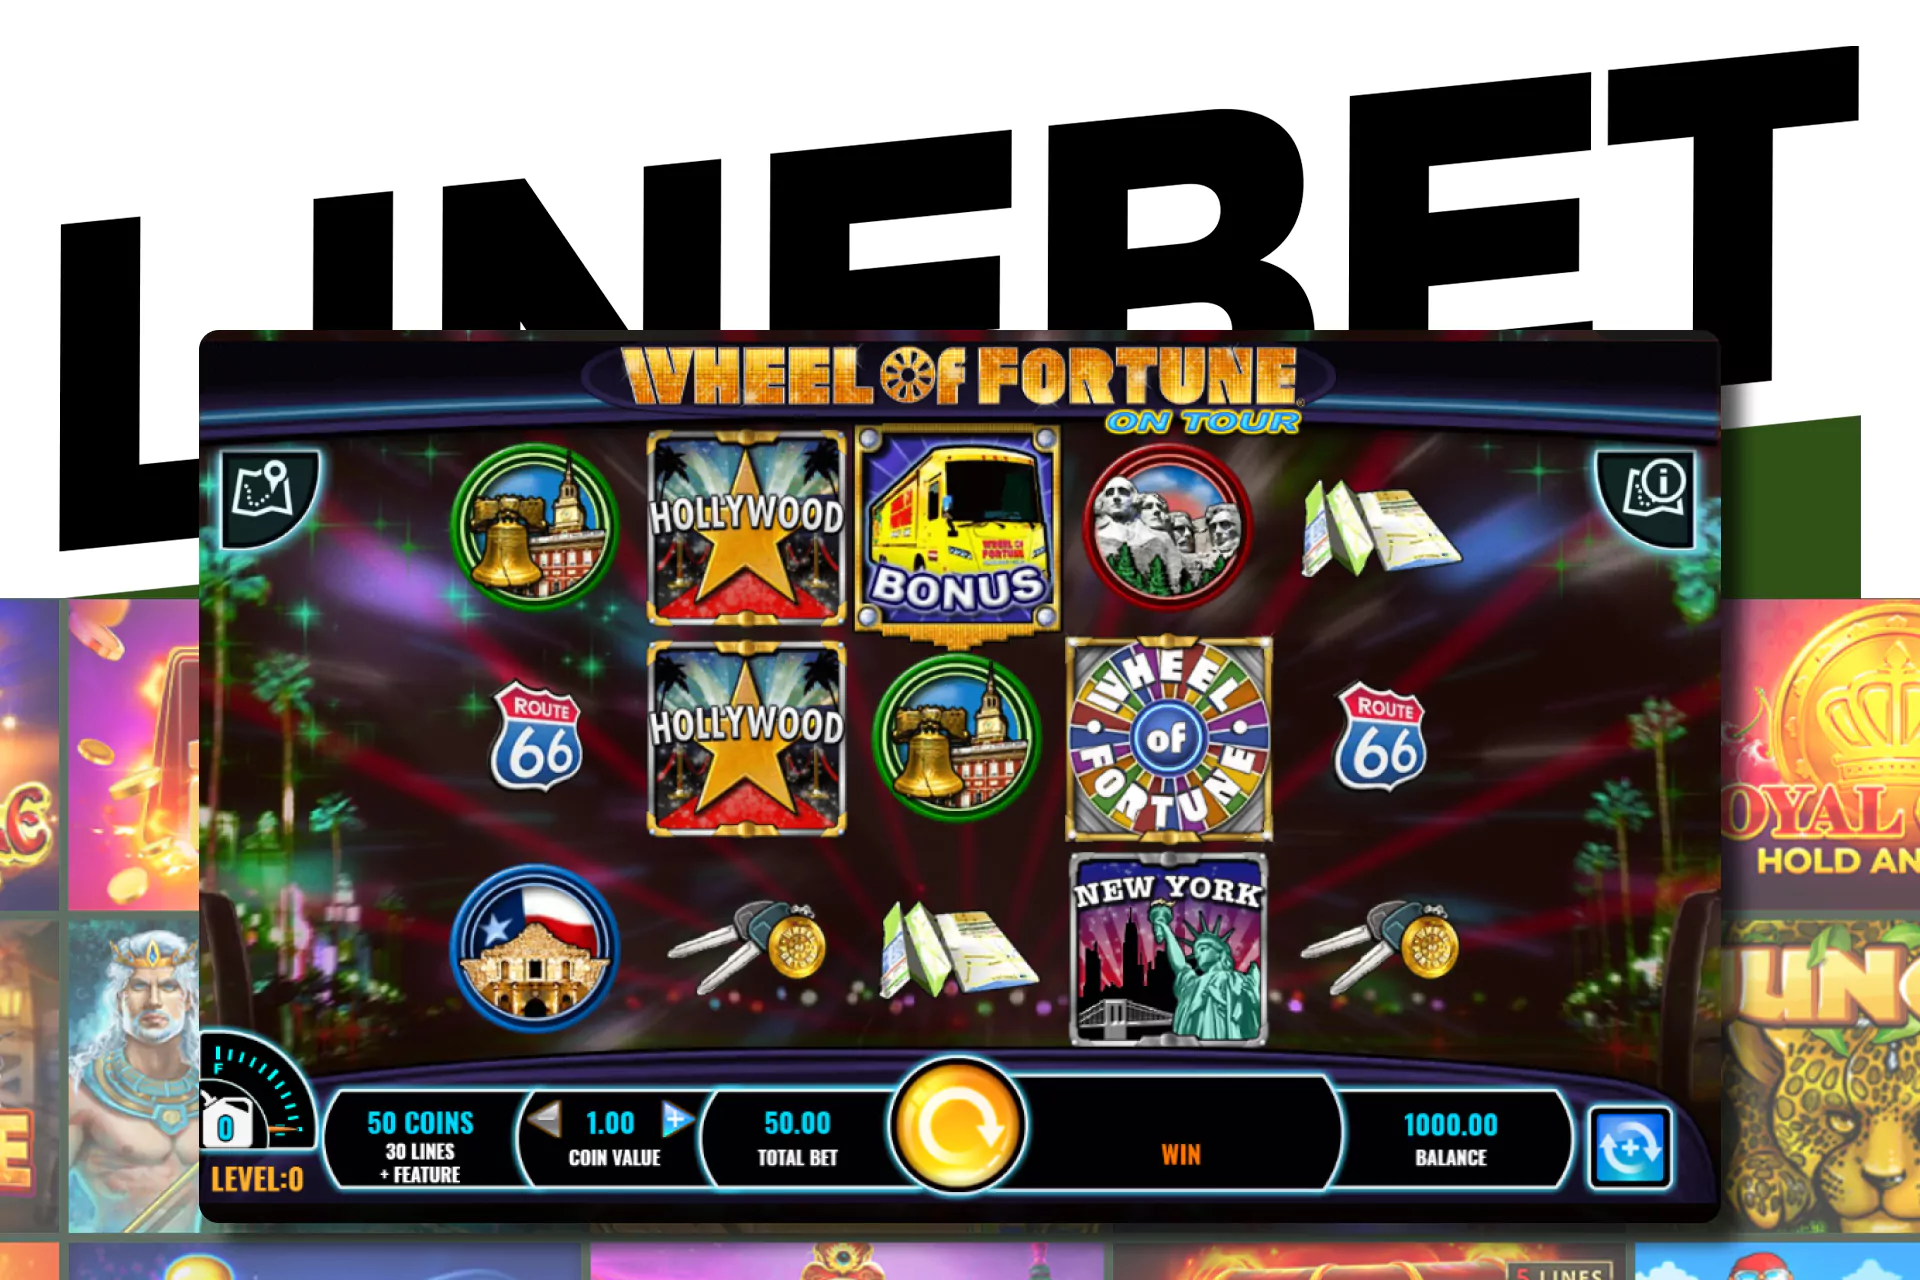 Try your luck in the Wheel of Fortune: On Your slot machine on Linebet.